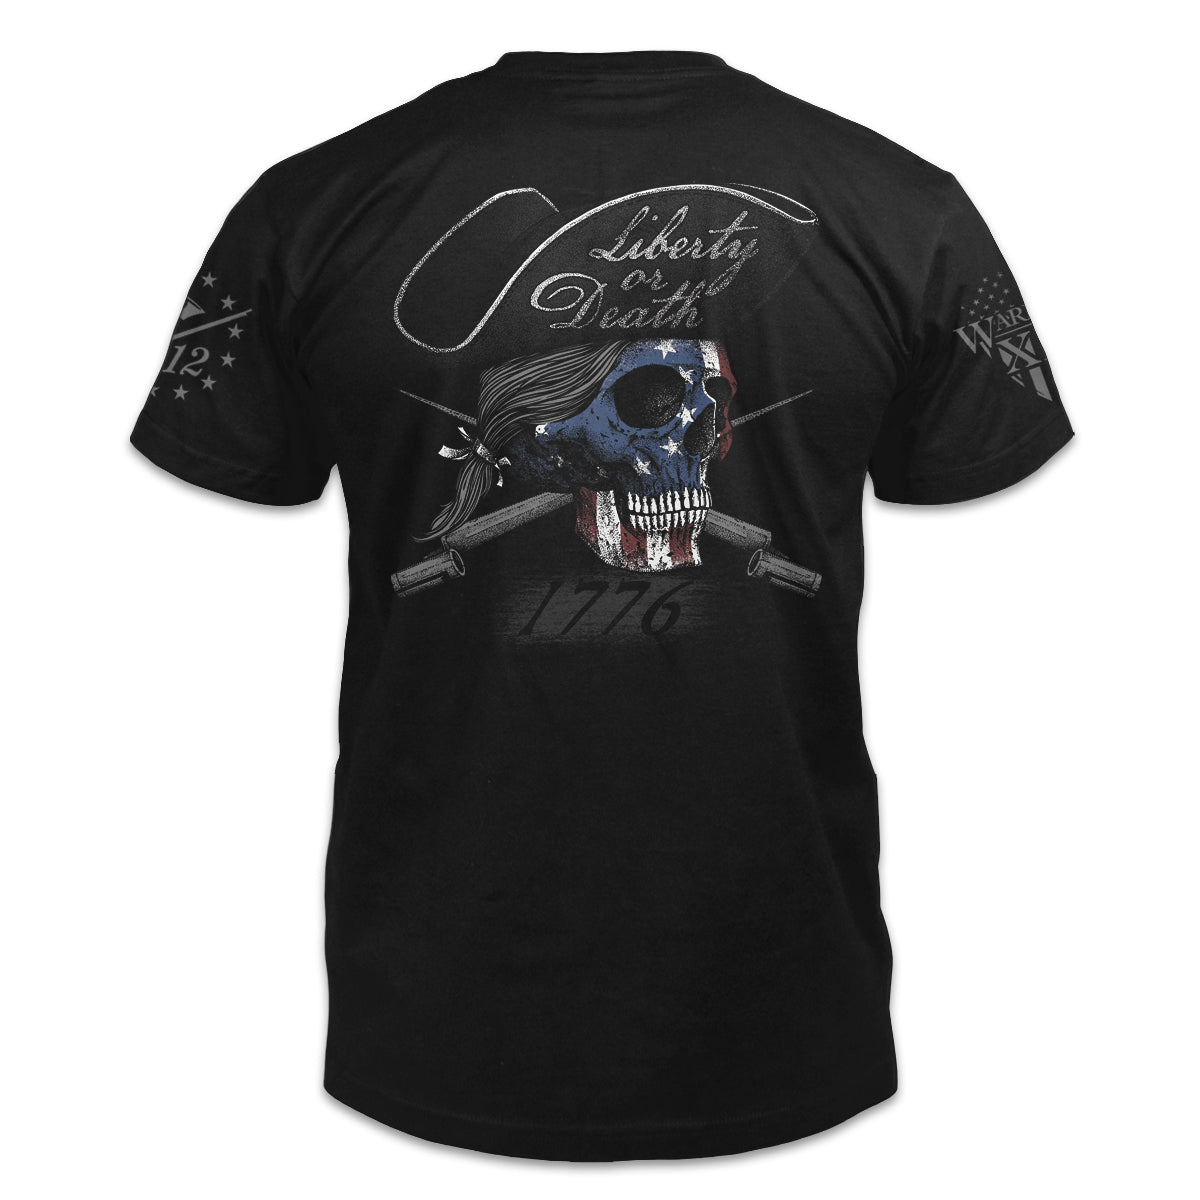 A black t-shirt with the words "Liberty or Death" with a USA themed skeleton head printed on the back of the shirt.